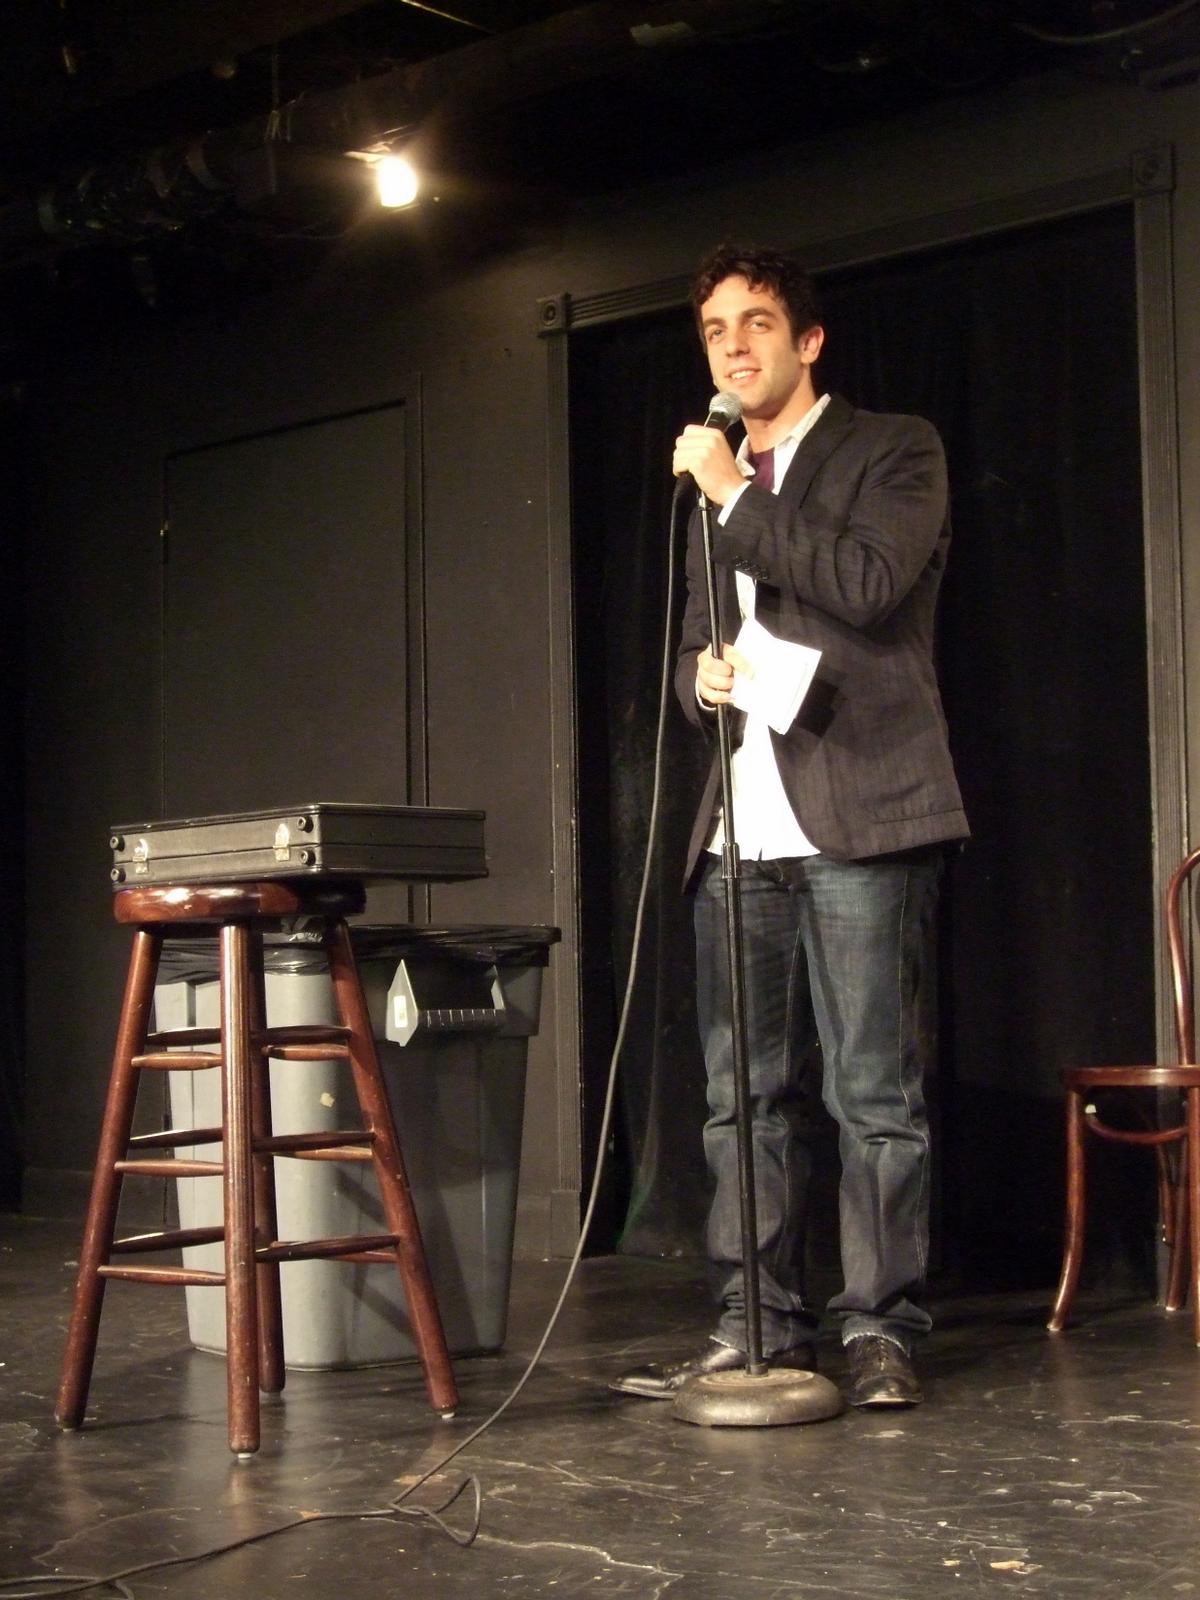 BJ Novak Net Worth, His Early Life, Career, Personal Life And More